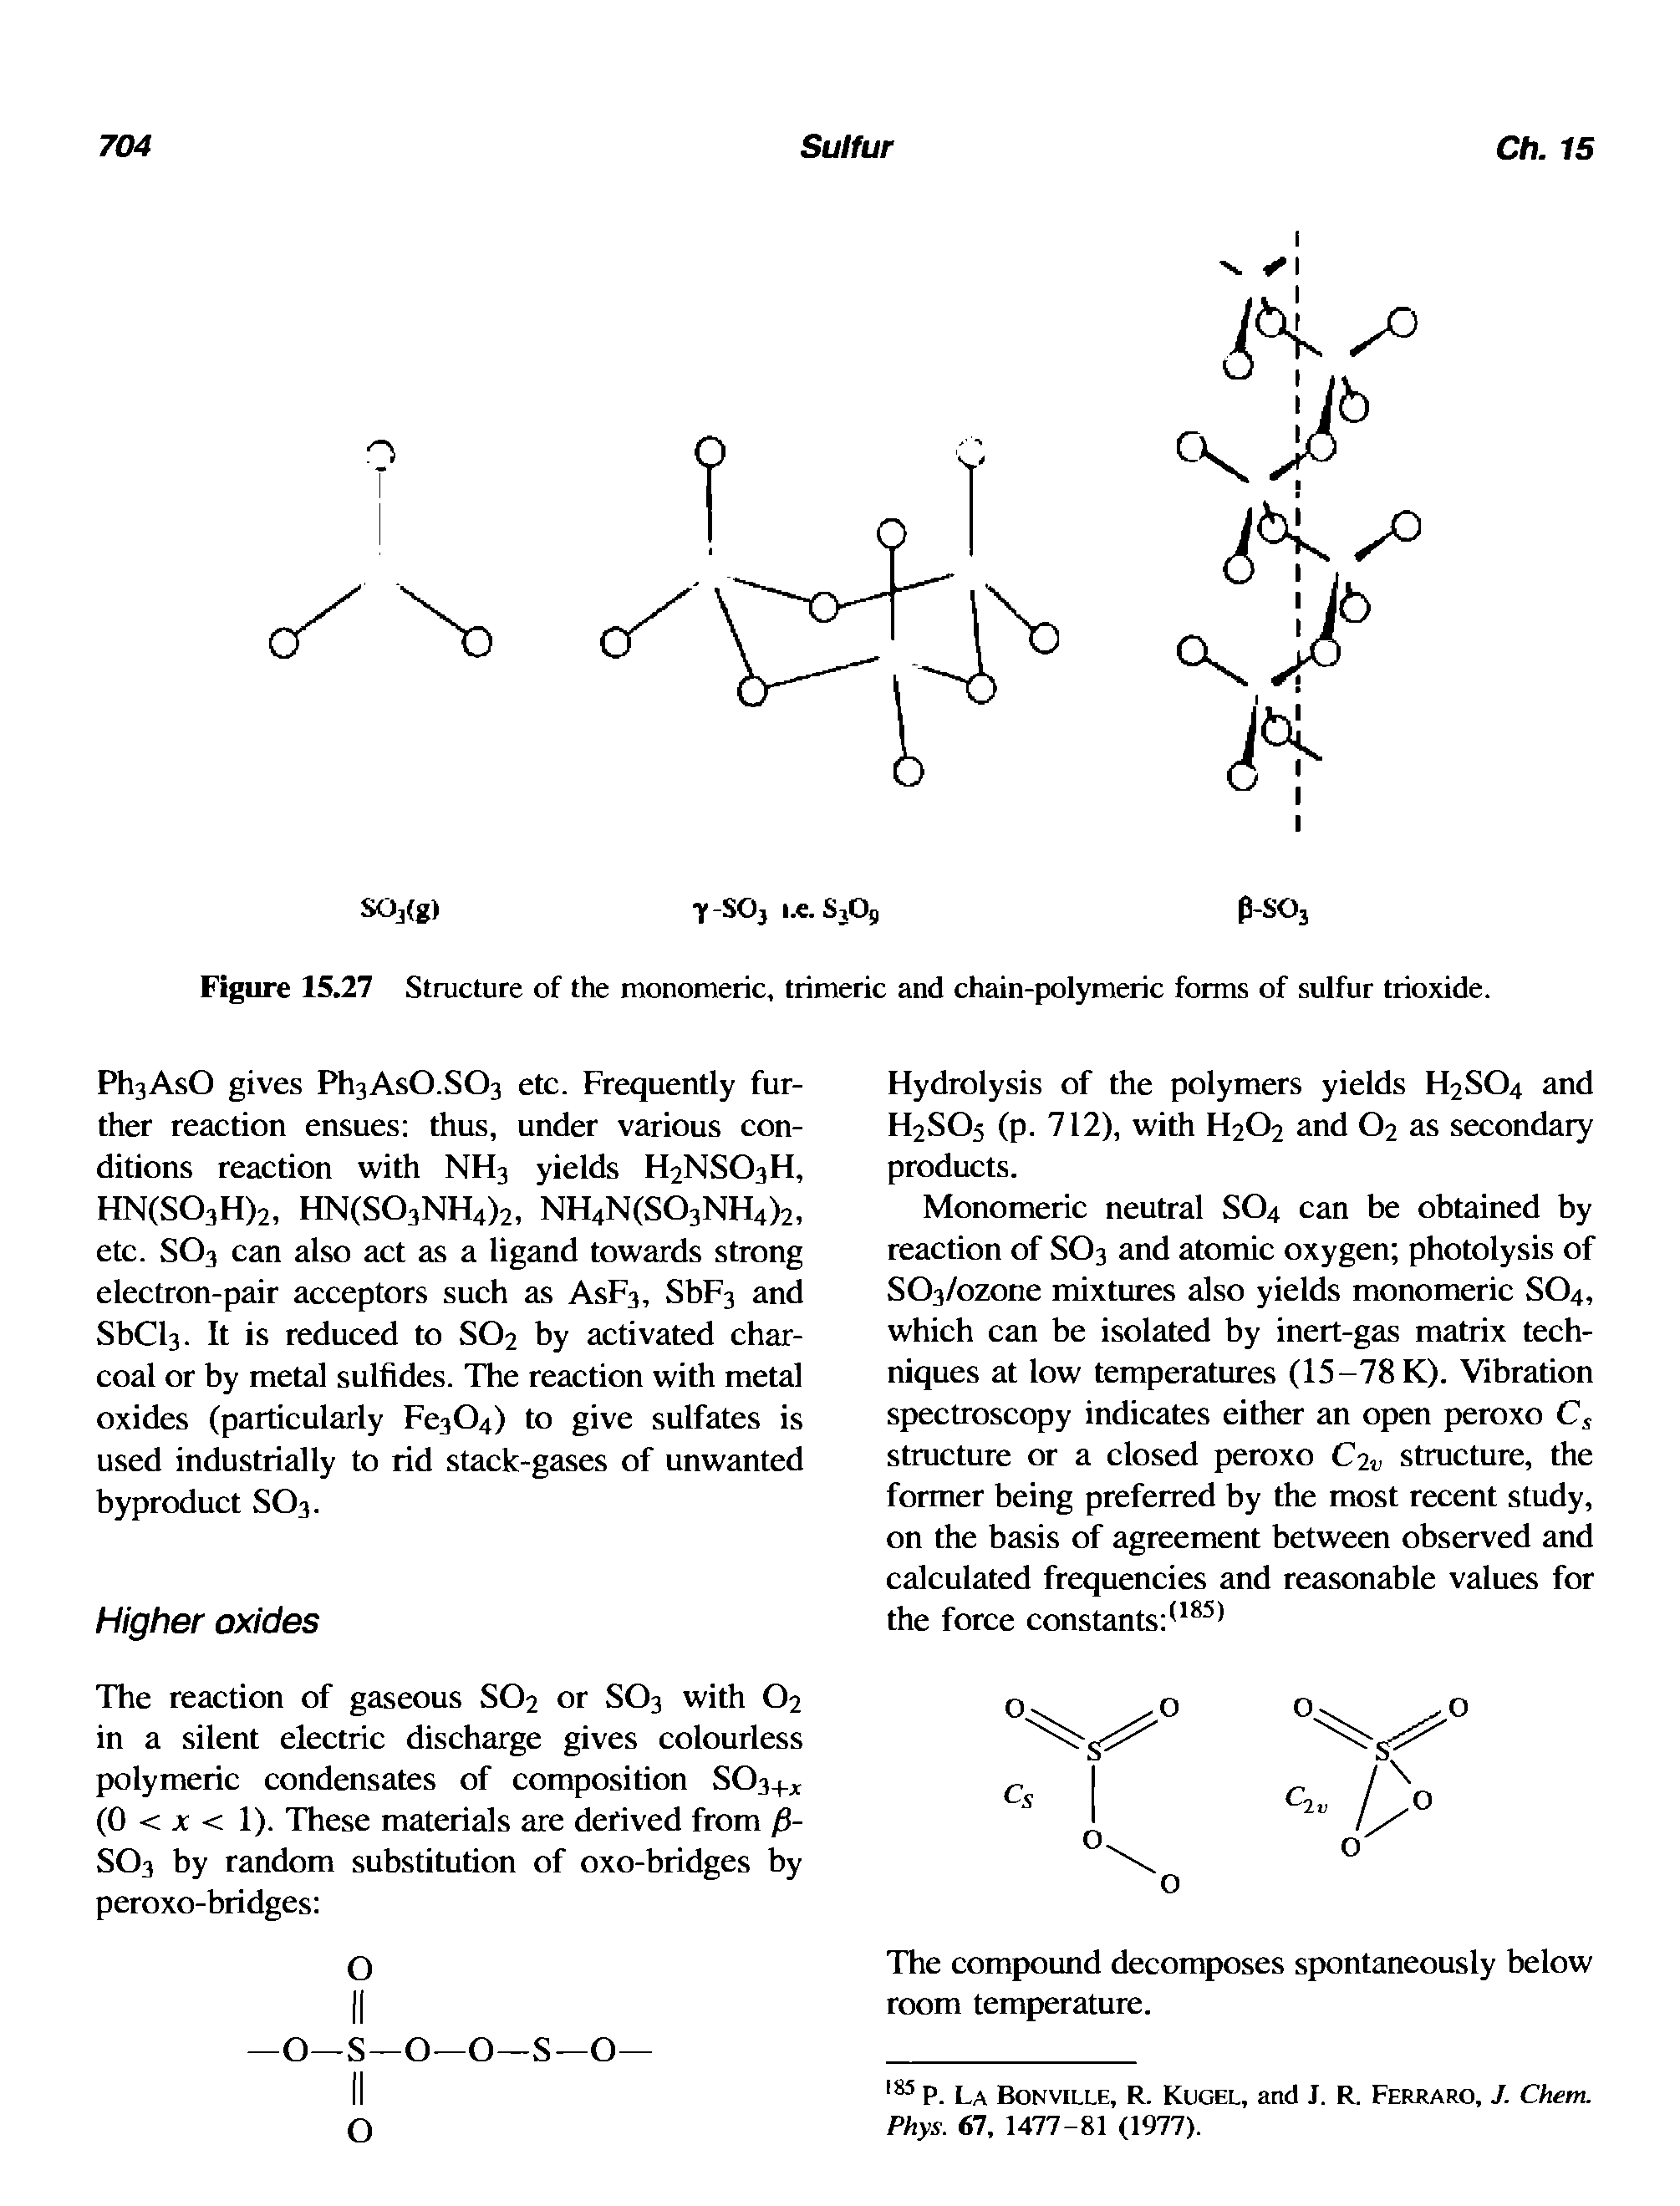 Figure 15.27 Structure of the monomeric, trimeric and chain-polymeric forms of sulfur trioxide.